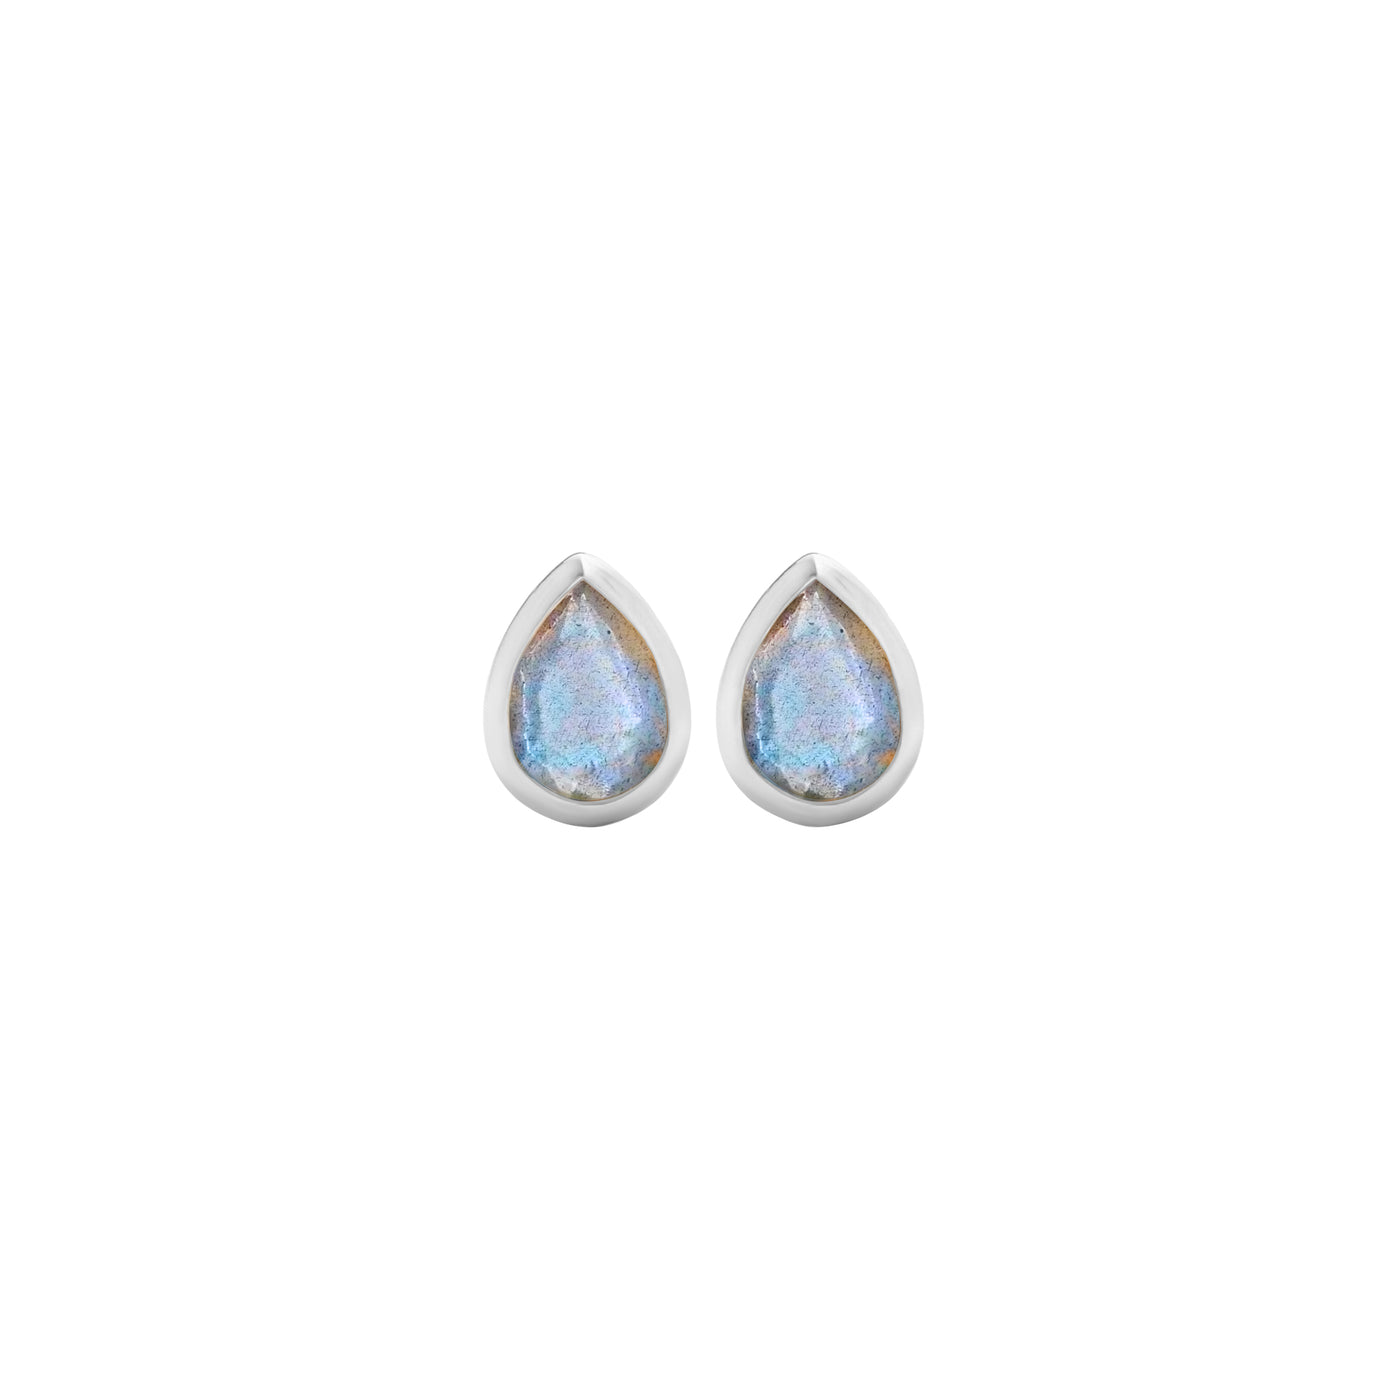 14 Karat White Gold Stud Earrings with Pear Shaped Labradorite Stone Against White Background